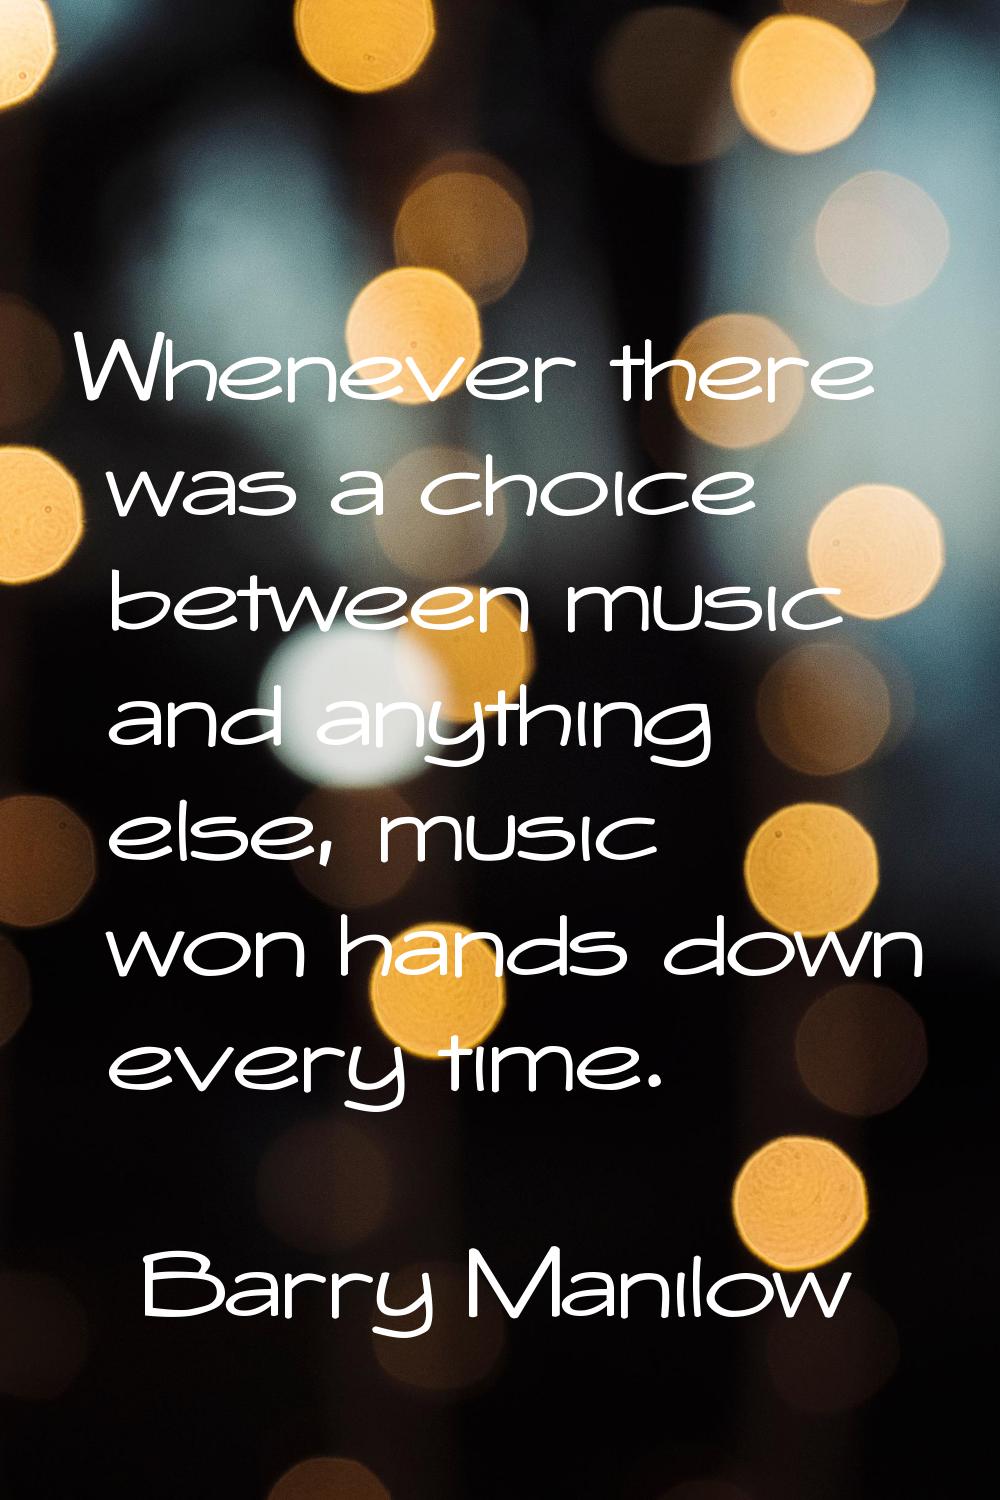 Whenever there was a choice between music and anything else, music won hands down every time.